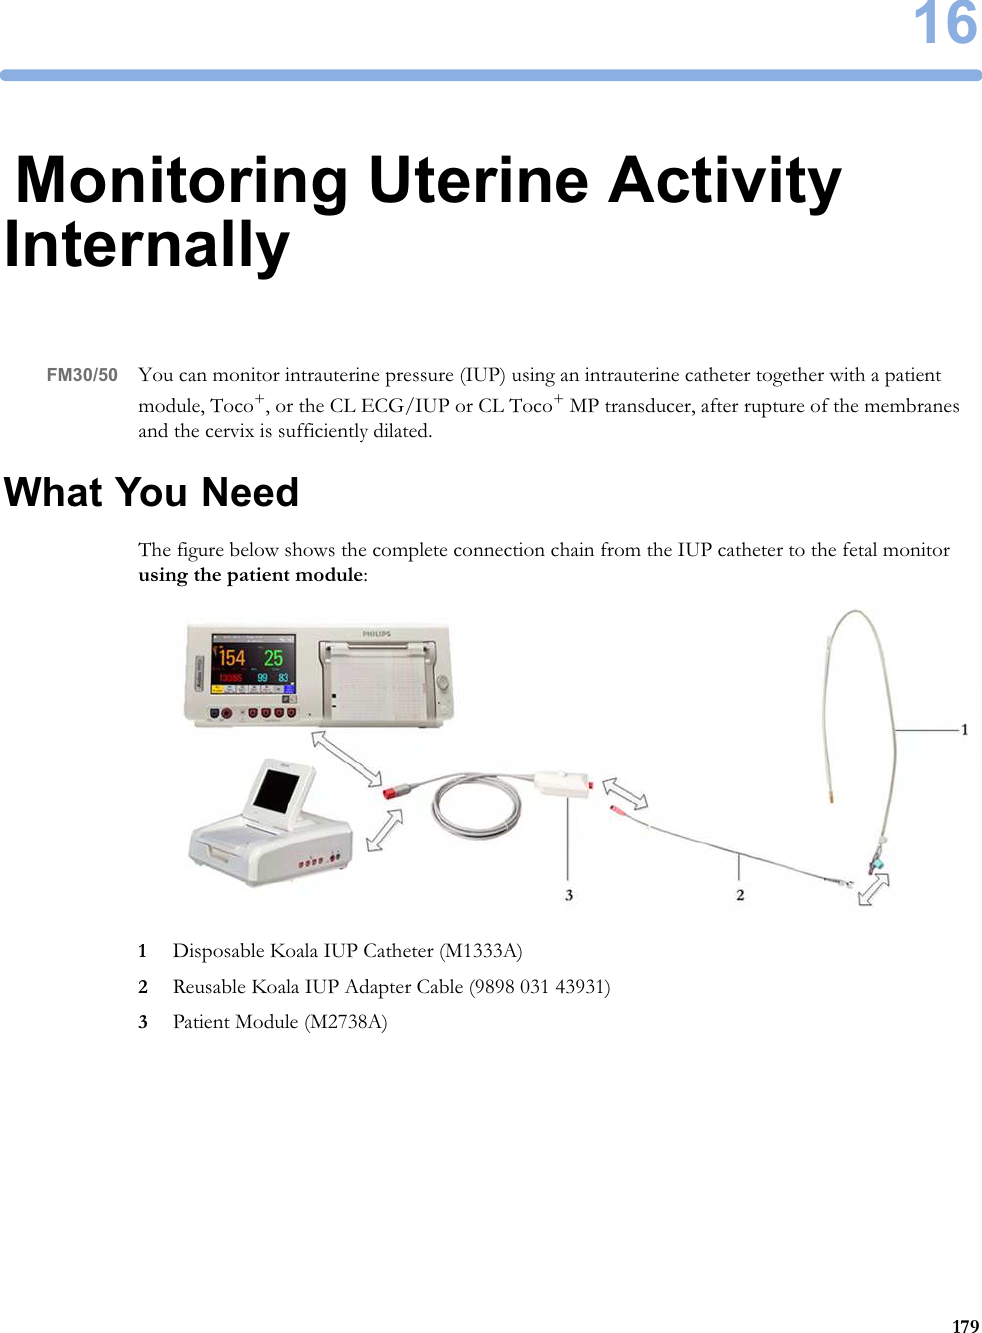 1617916Monitoring Uterine Activity InternallyFM30/50 You can monitor intrauterine pressure (IUP) using an intrauterine catheter together with a patient module, Toco+, or the CL ECG/IUP or CL Toco+ MP transducer, after rupture of the membranes and the cervix is sufficiently dilated.What You NeedThe figure below shows the complete connection chain from the IUP catheter to the fetal monitor using the patient module:1Disposable Koala IUP Catheter (M1333A)2Reusable Koala IUP Adapter Cable (9898 031 43931)3Patient Module (M2738A)